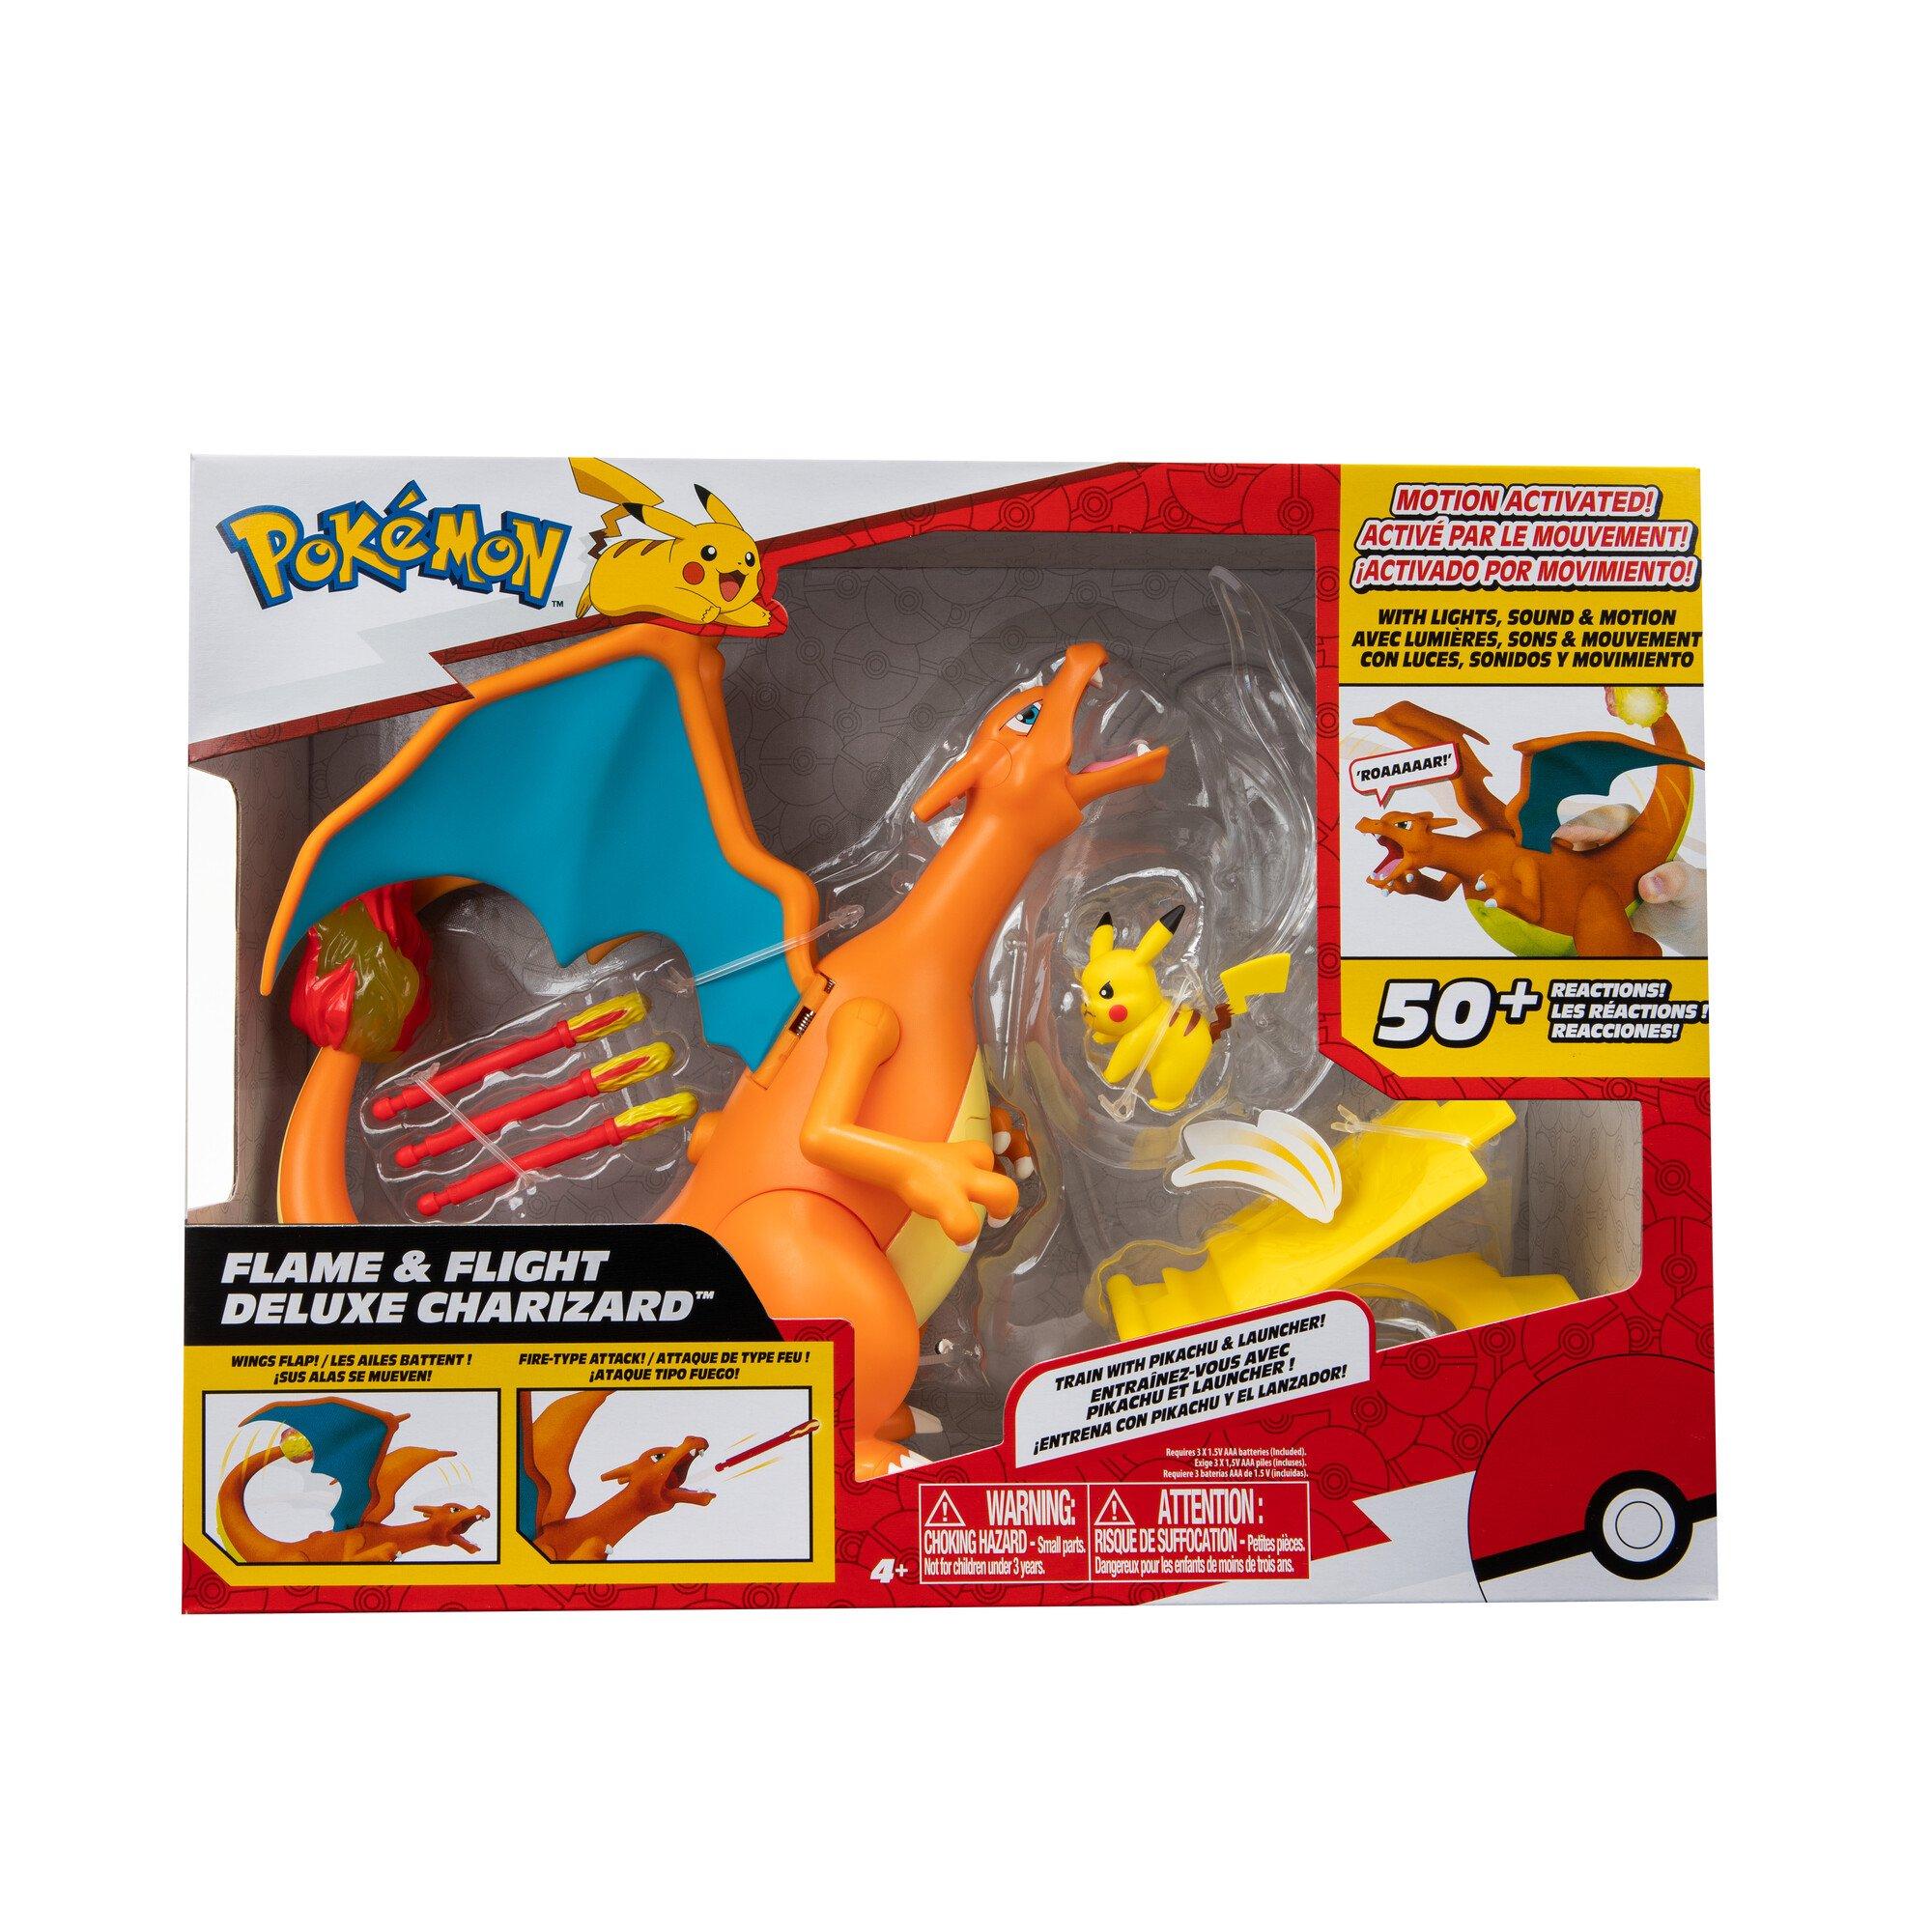 Pokémon Pokemon Charizard, Super-Articulated 6-Inch Figure - Collect Your  Favorite Figures - Toys for Kids and Fans